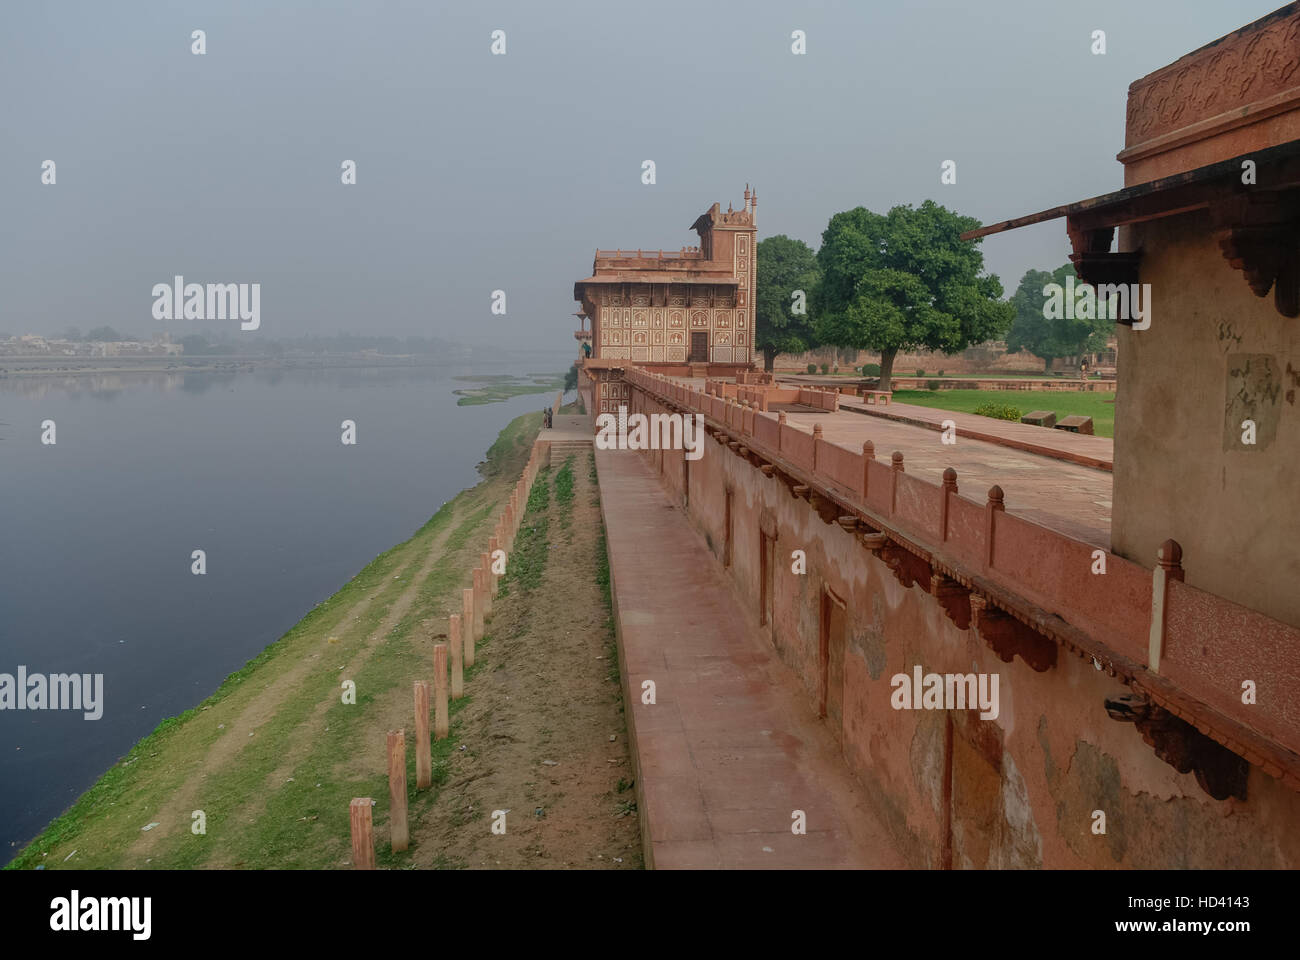 View of Yamuna river from Itmad-Ud-Daulah's tomb in Agra, Uttar Pradesh, India. Also known as the Jewel Box or the Baby Taj. Stock Photo